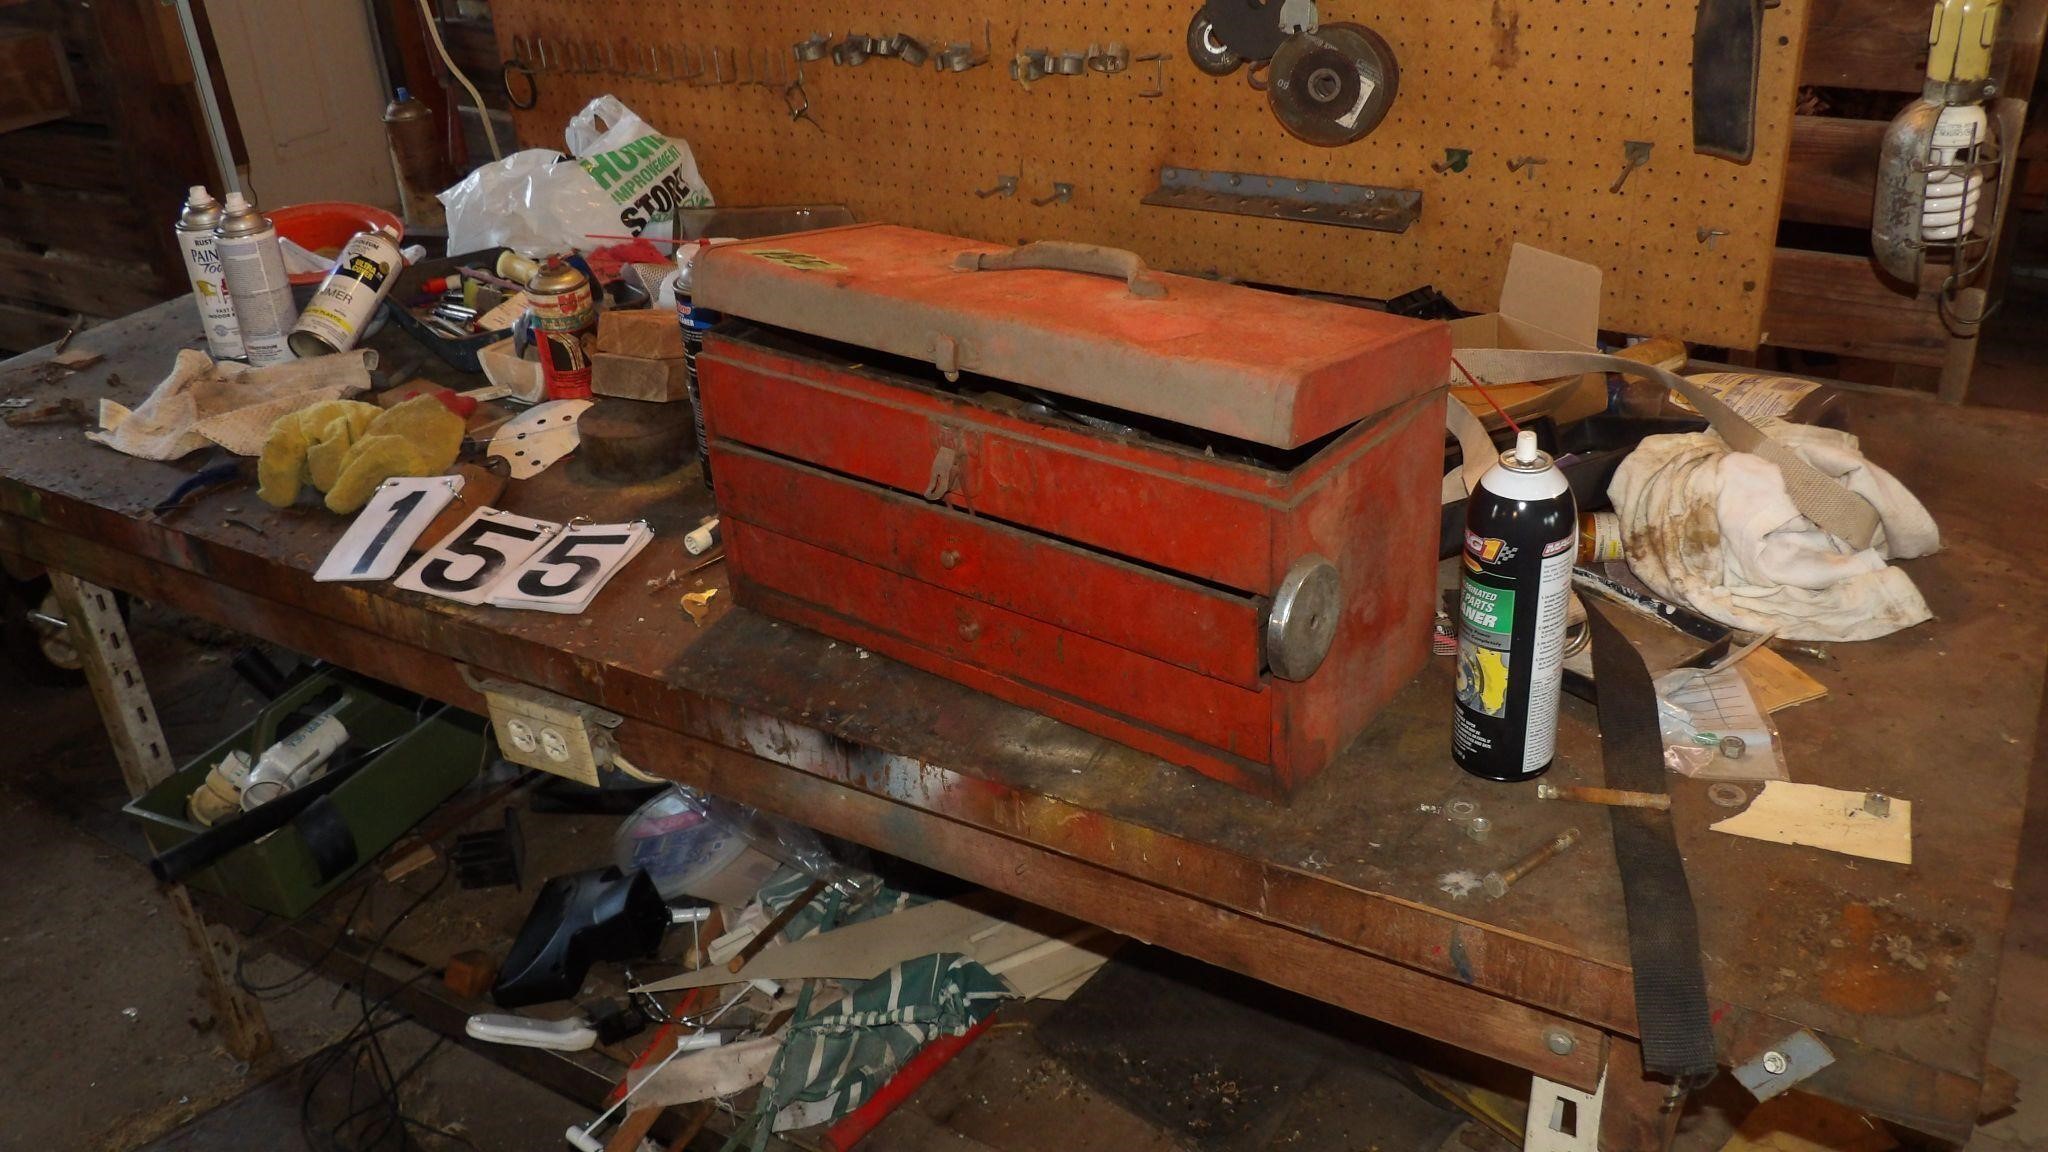 Work Bench, Tool Box and Contents